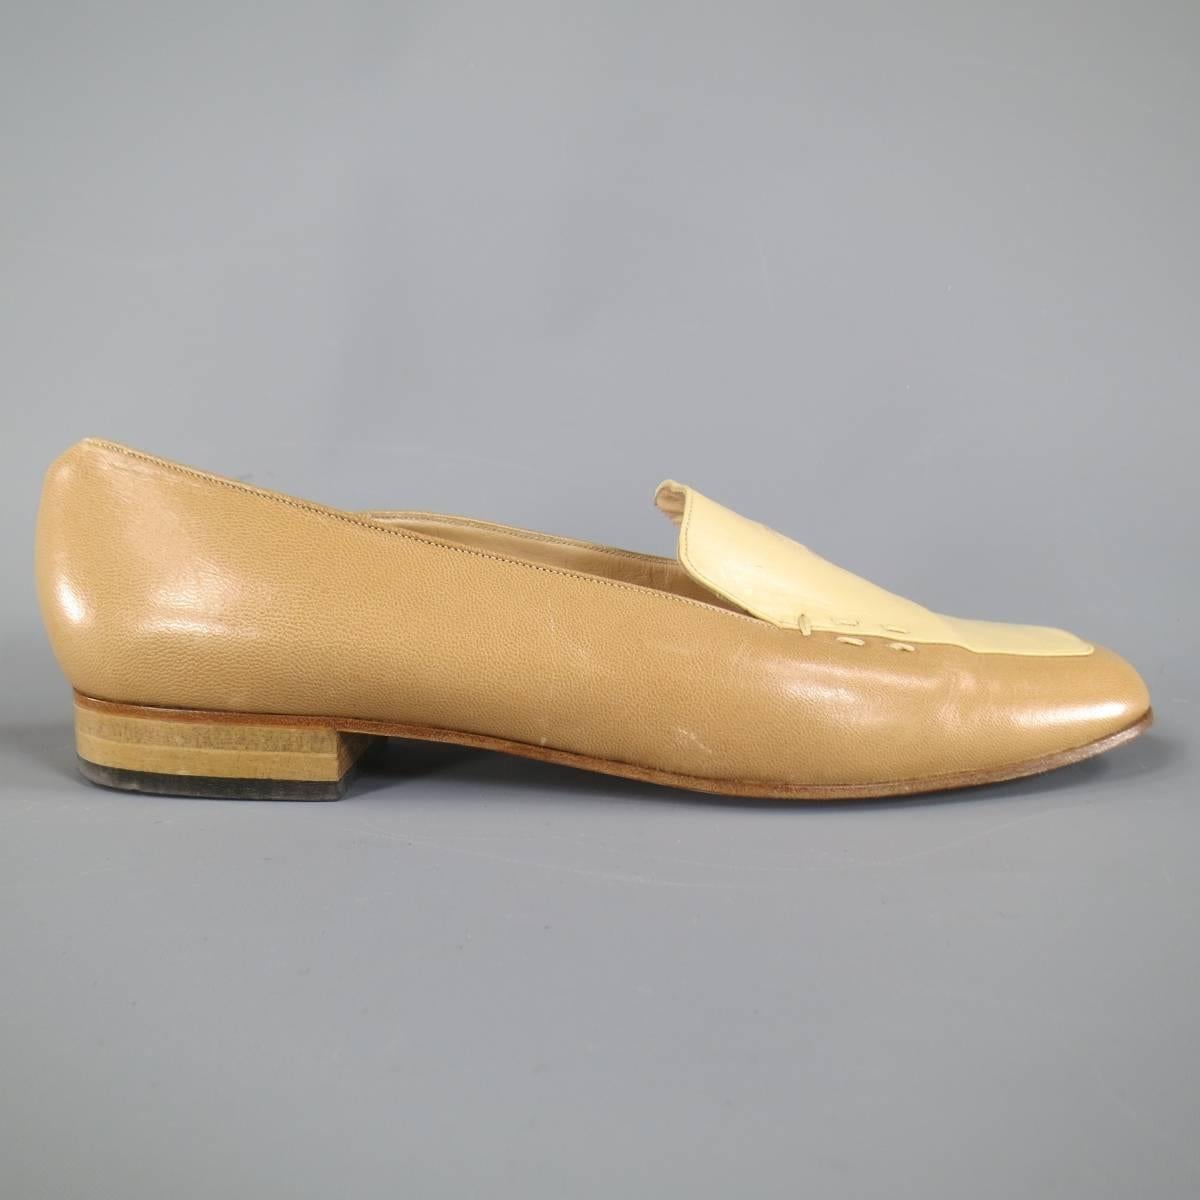 Fabulous vintage CHANEL color block loafers in tan and beige leather with a squared off pointed toe, low heel, and embroidered logo detail. Made in Italy.

Good Pre-Owned Condition.
Marked: IT 40

Heel: 0.75 in.